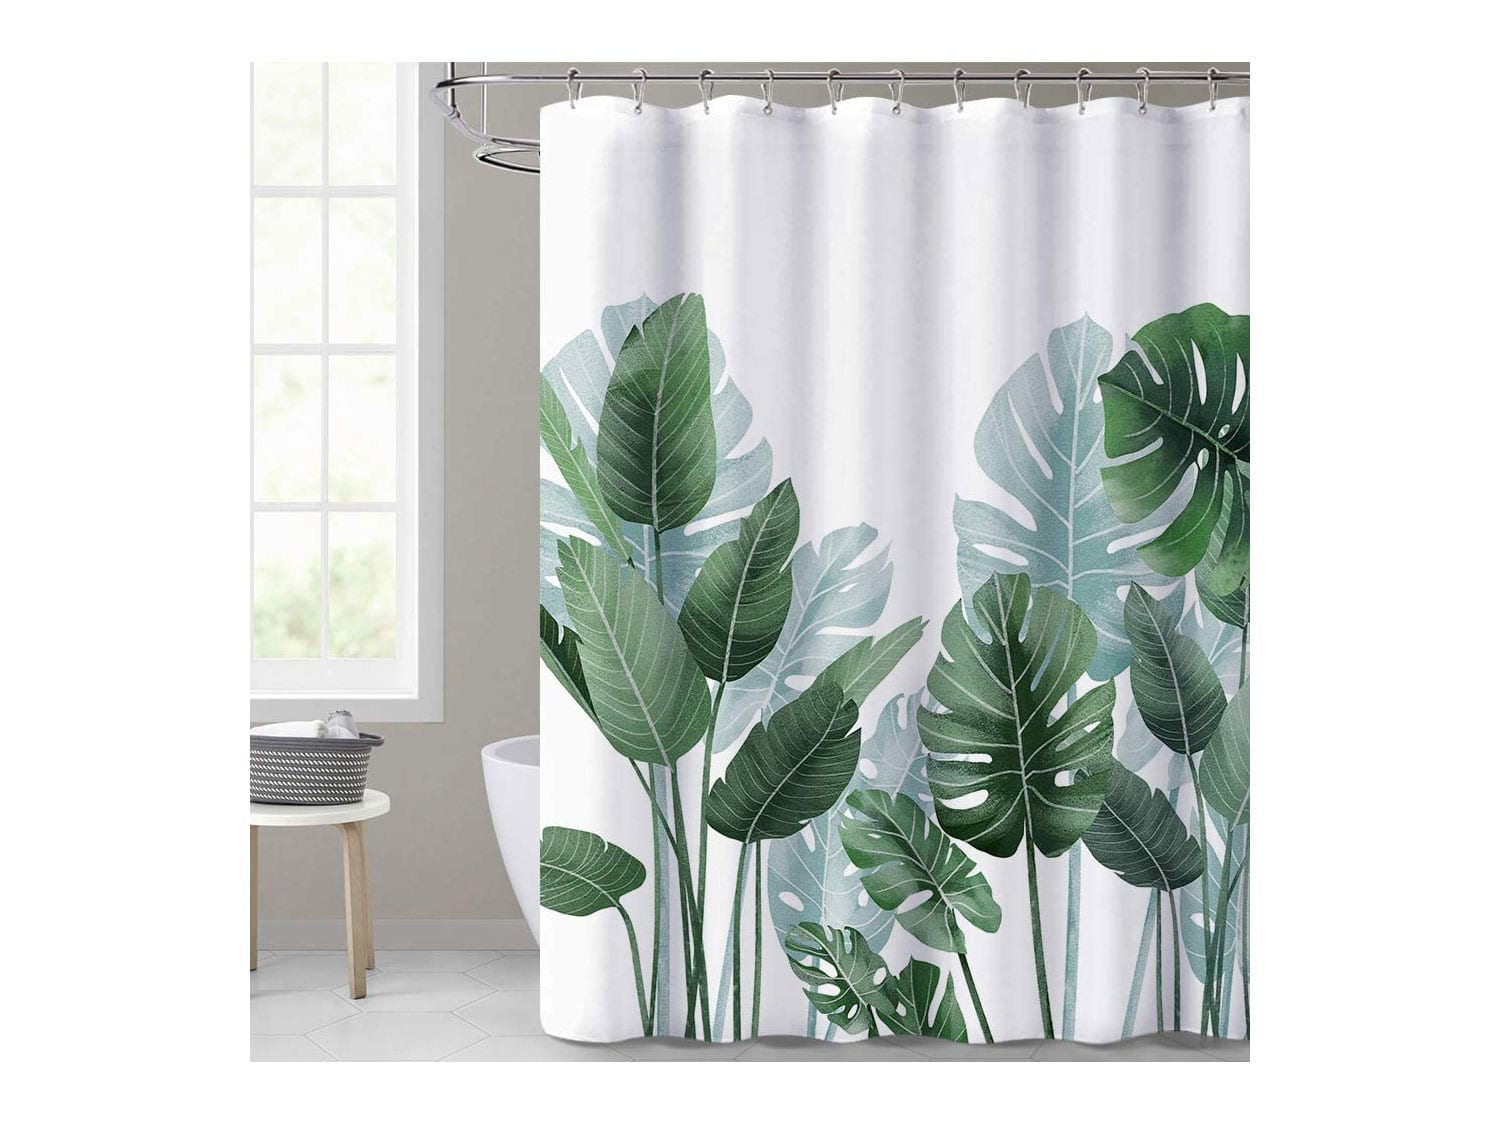 KGORGE Shower Curtains for Bathroom - Tropical Leaves Plant on White Background Odorless Curtain for Bathroom Showers and Bathtubs, 72 x 72 inches Long, Hooks Included